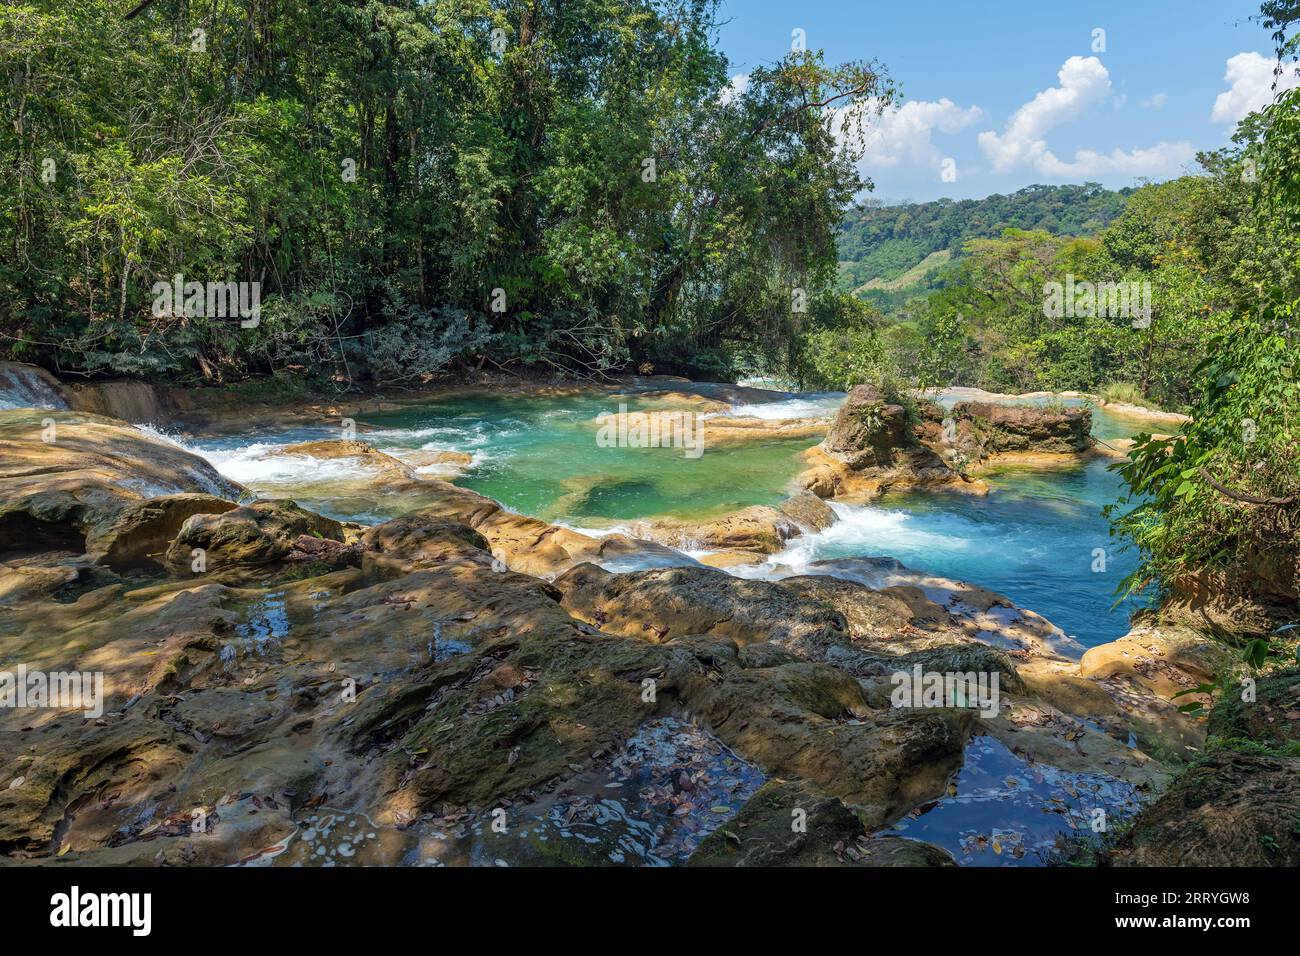 Agua Azul cascades with tropical rainforest and turquoise waters near Palenque, Chiapas, Mexico. Stock Photo